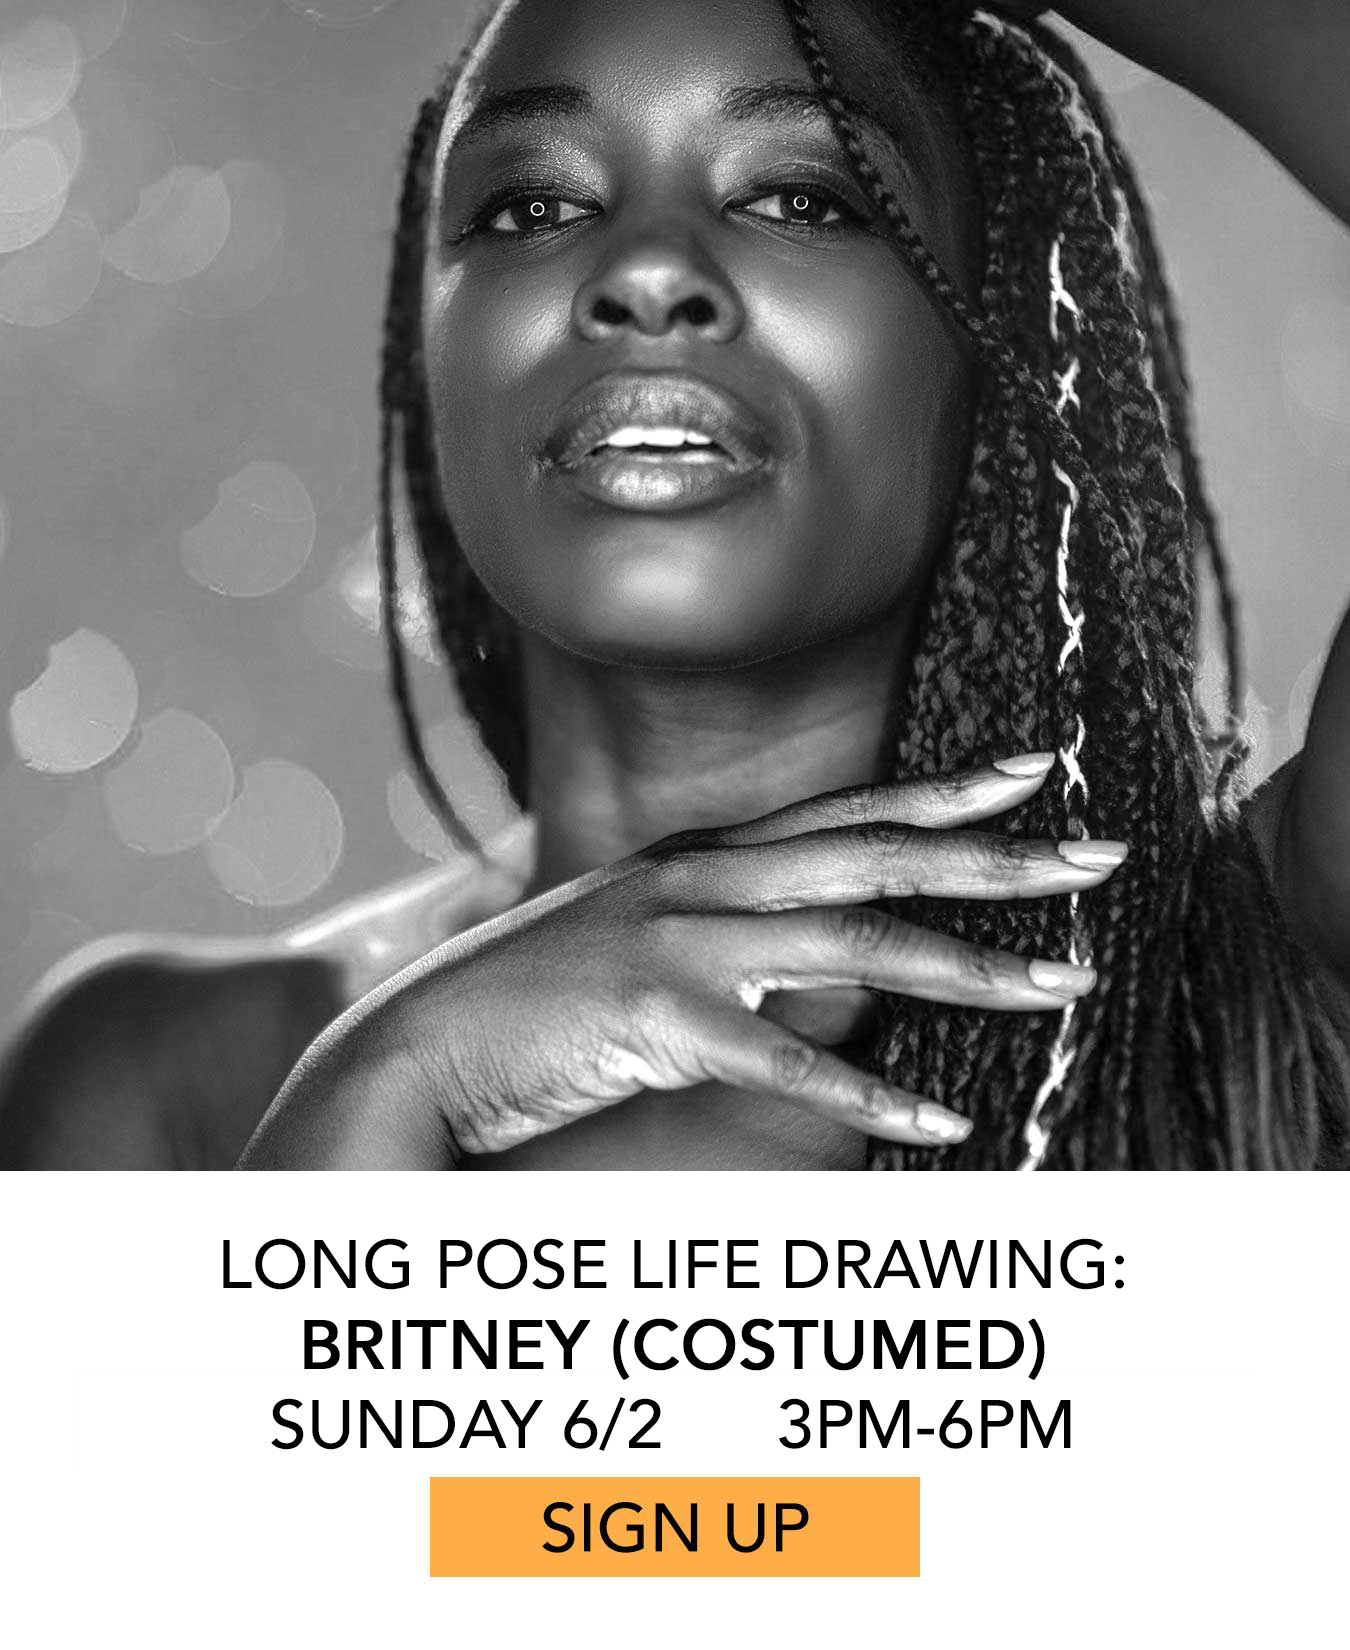 Life Drawing: Britney (costumed). Sunday 6/2 from 3pm to 6pm. Click to Sign Up.